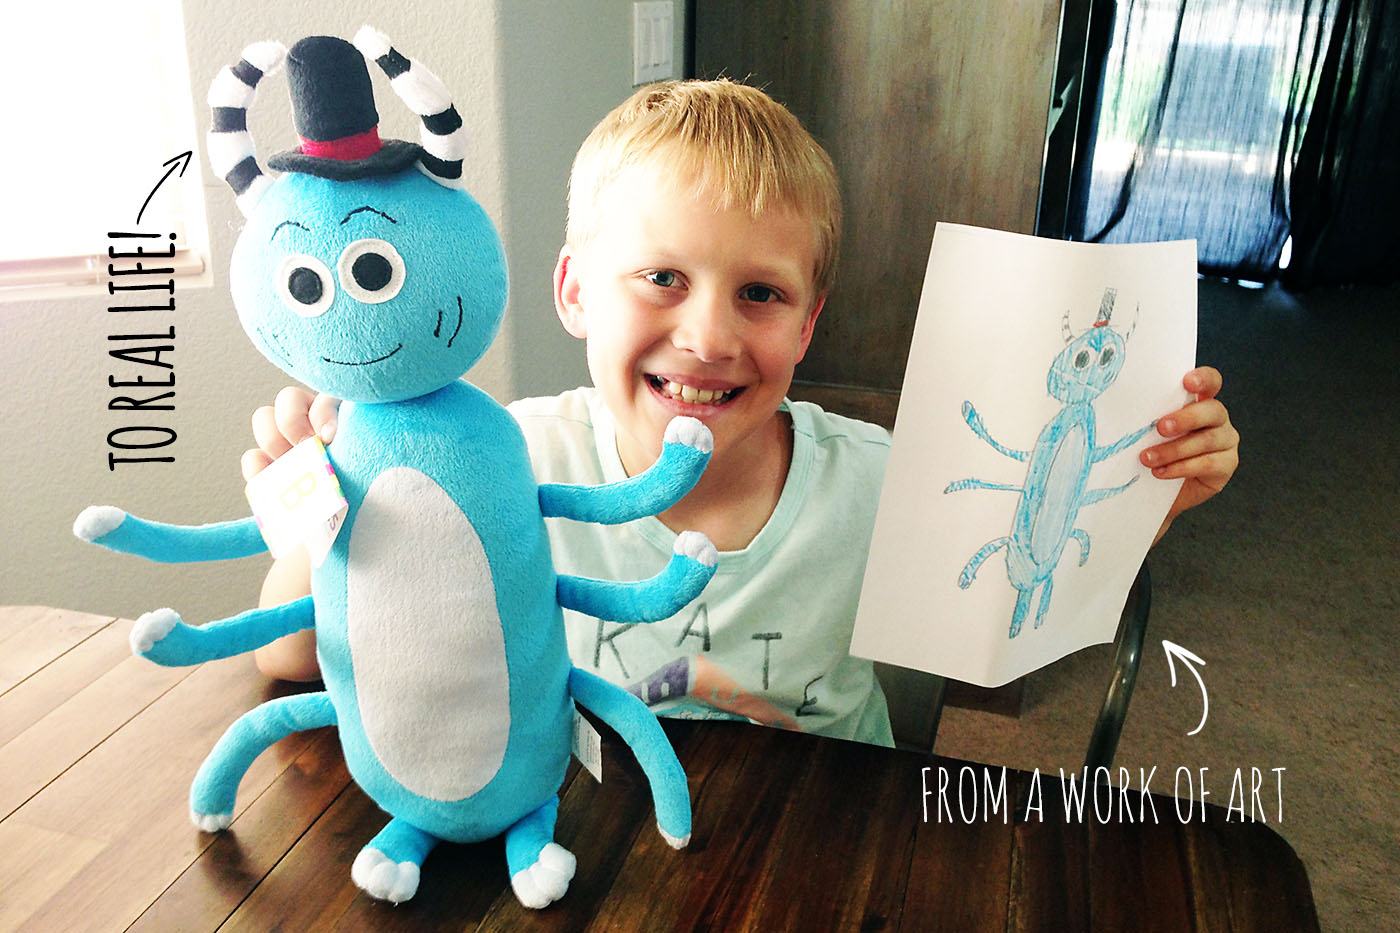 From a drawing to a custom hand-sewn stuffed animal. Such a great gift idea!